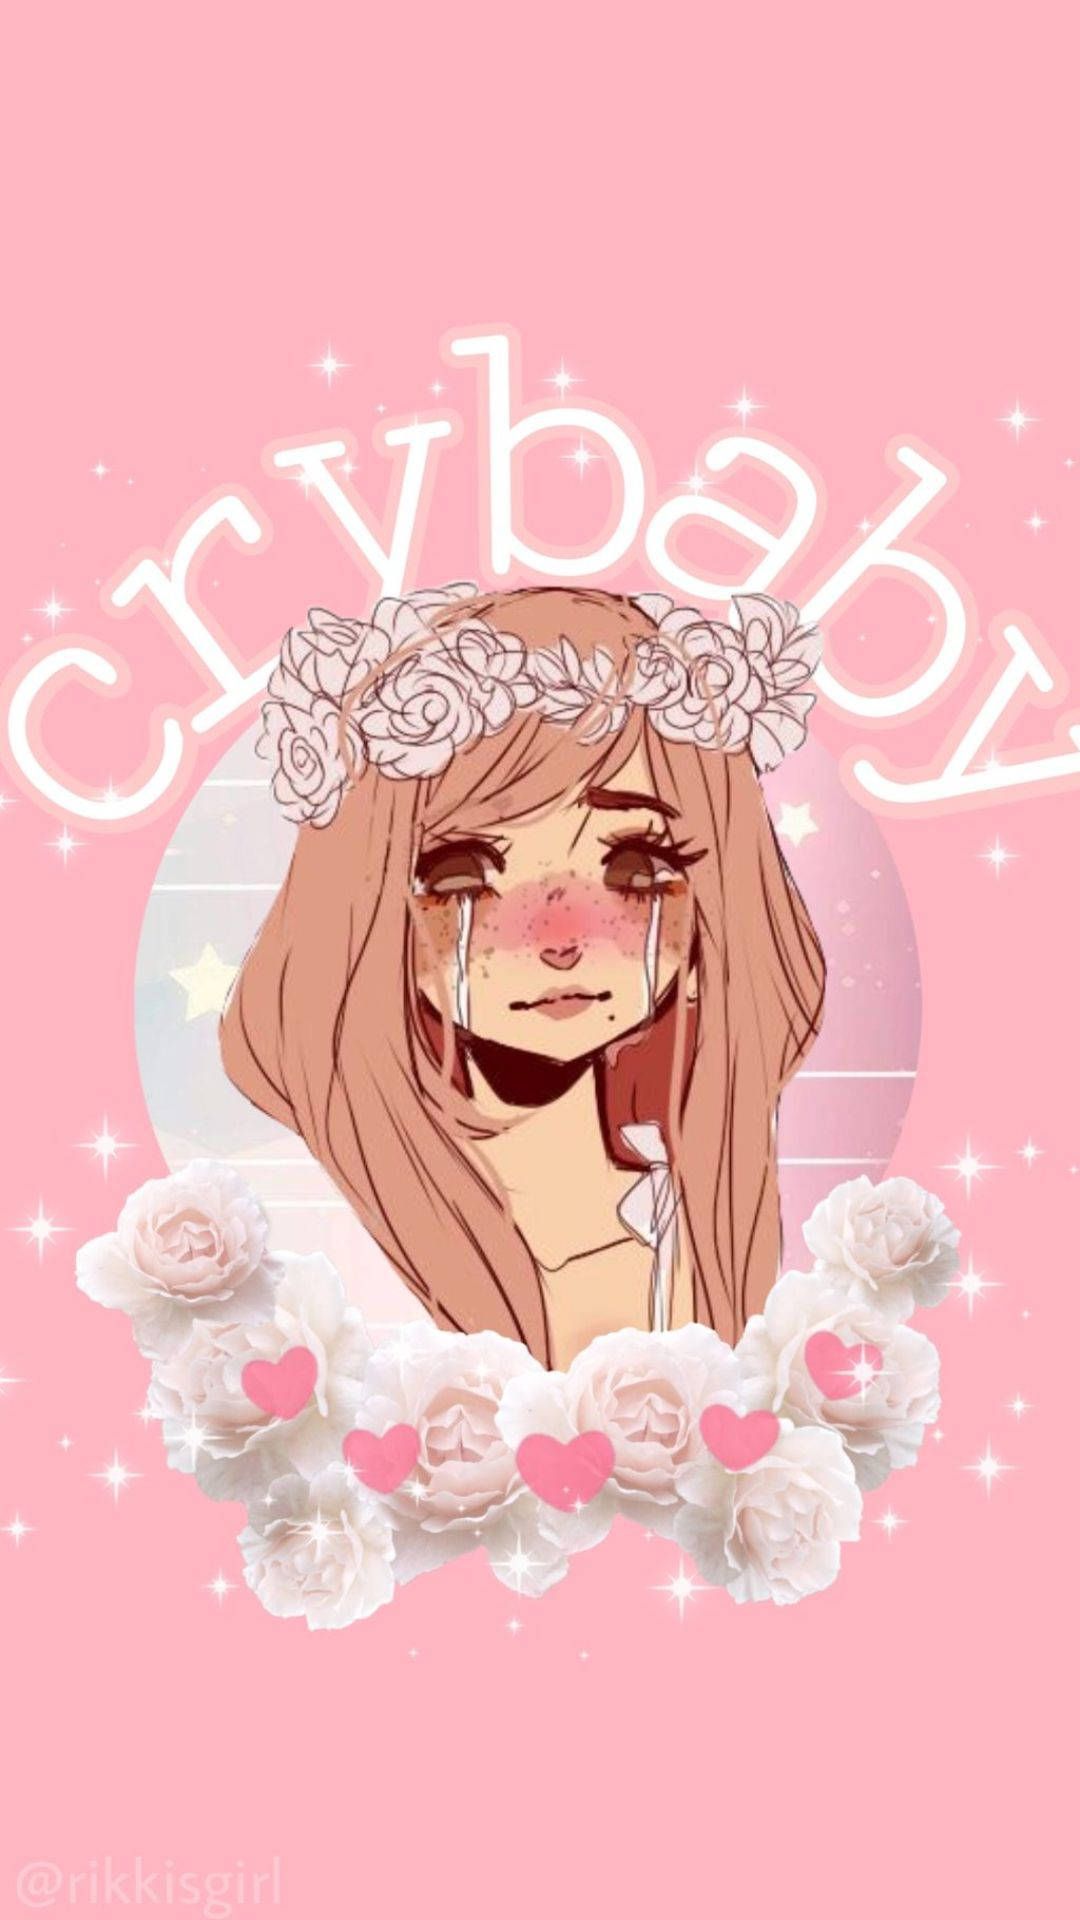 Download Crybaby Aesthetic Profile Wallpaper